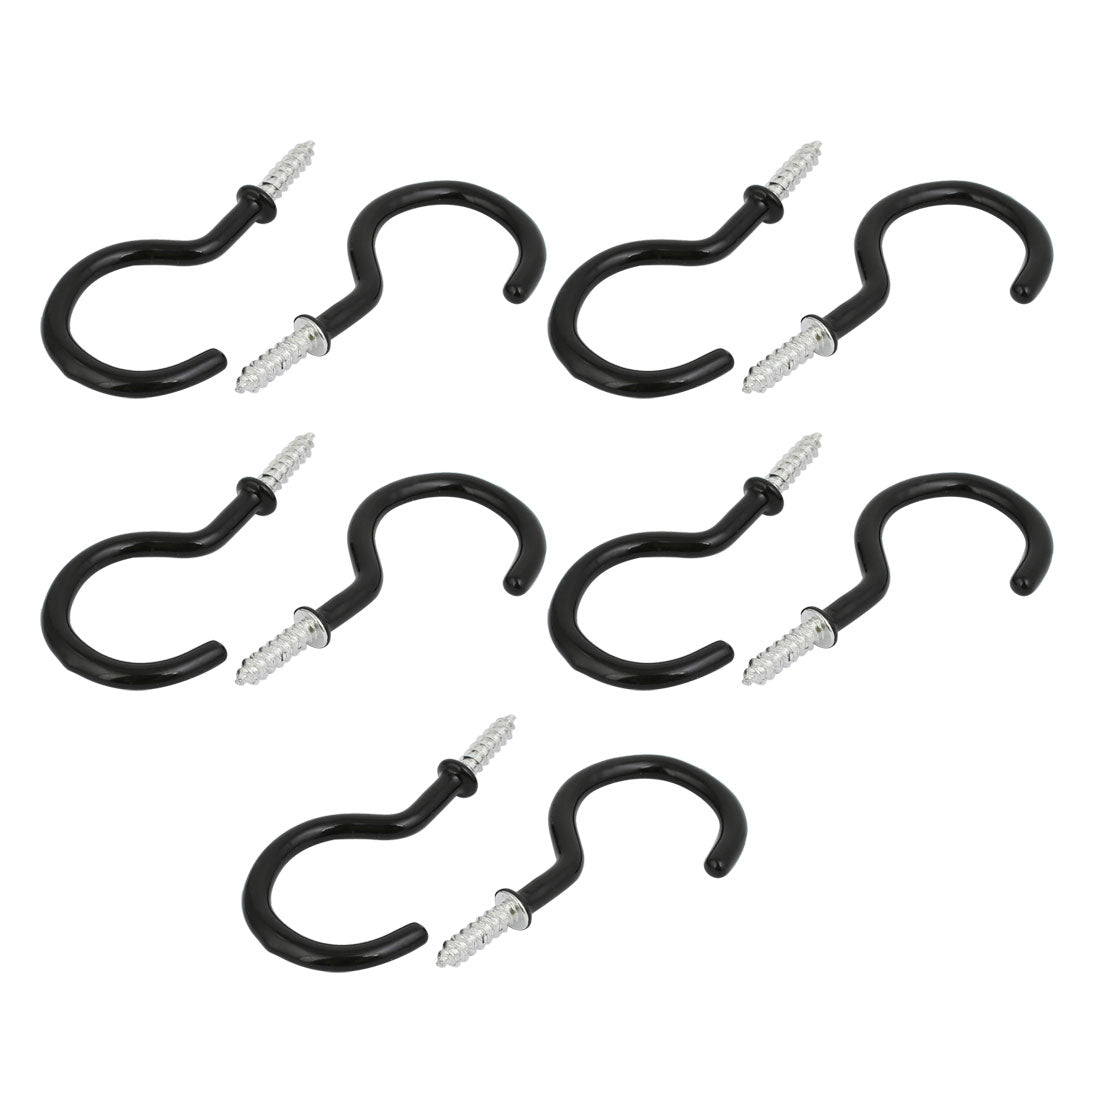 uxcell Uxcell 2 Inch Plastic Coated Screw-in Open Cup Ceiling Hooks Hangers Black 10pcs